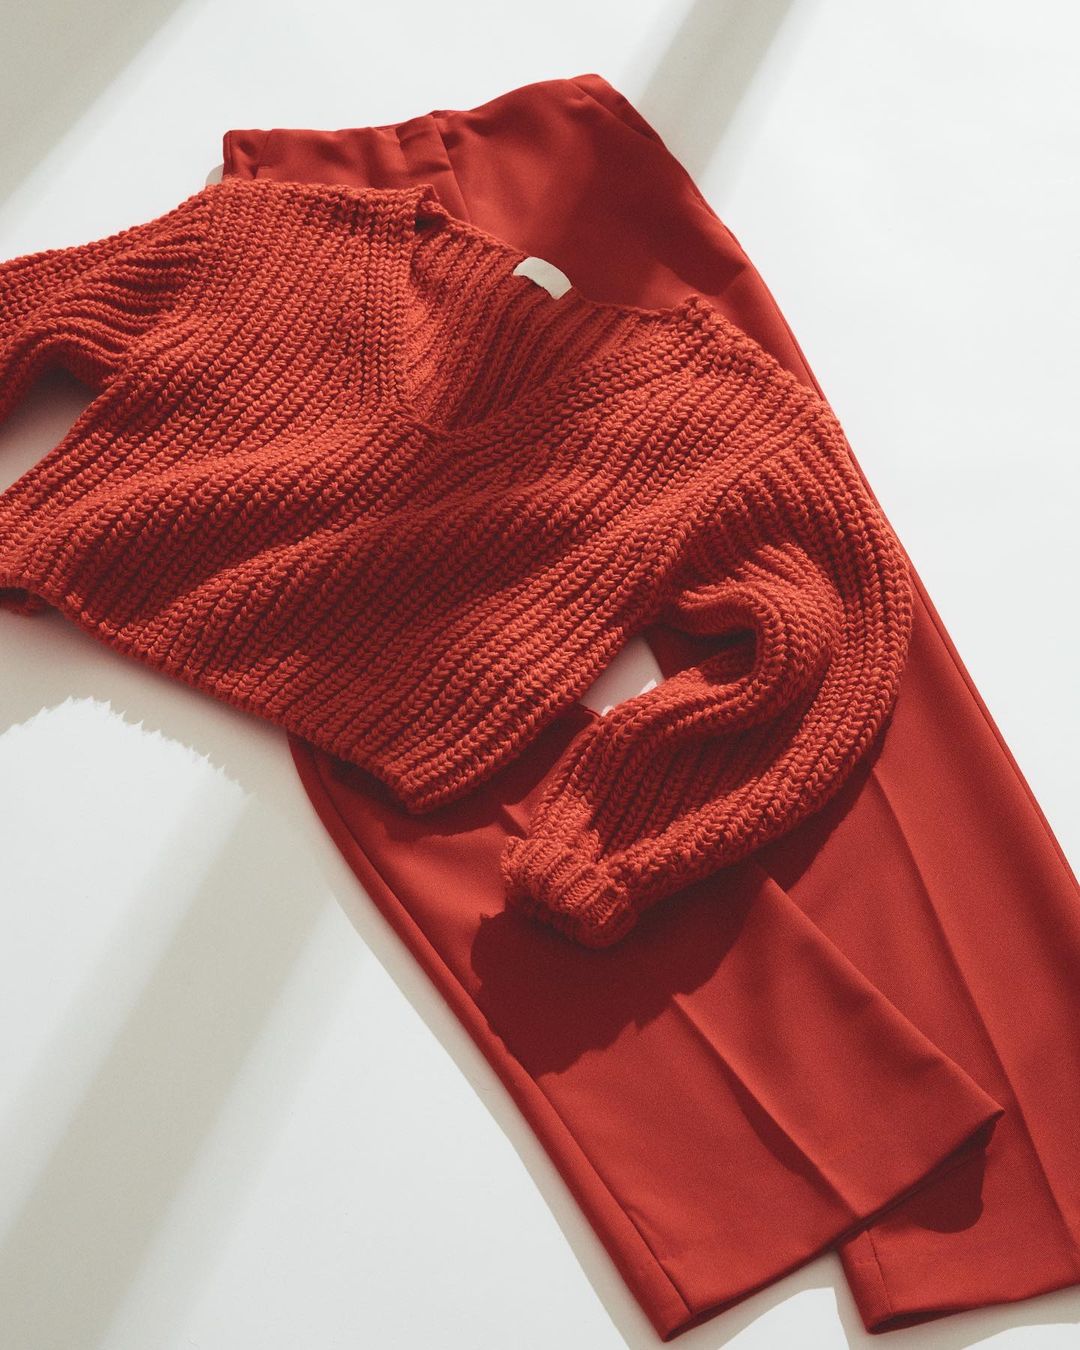 Red trousers with a red knit sweater laid over it.